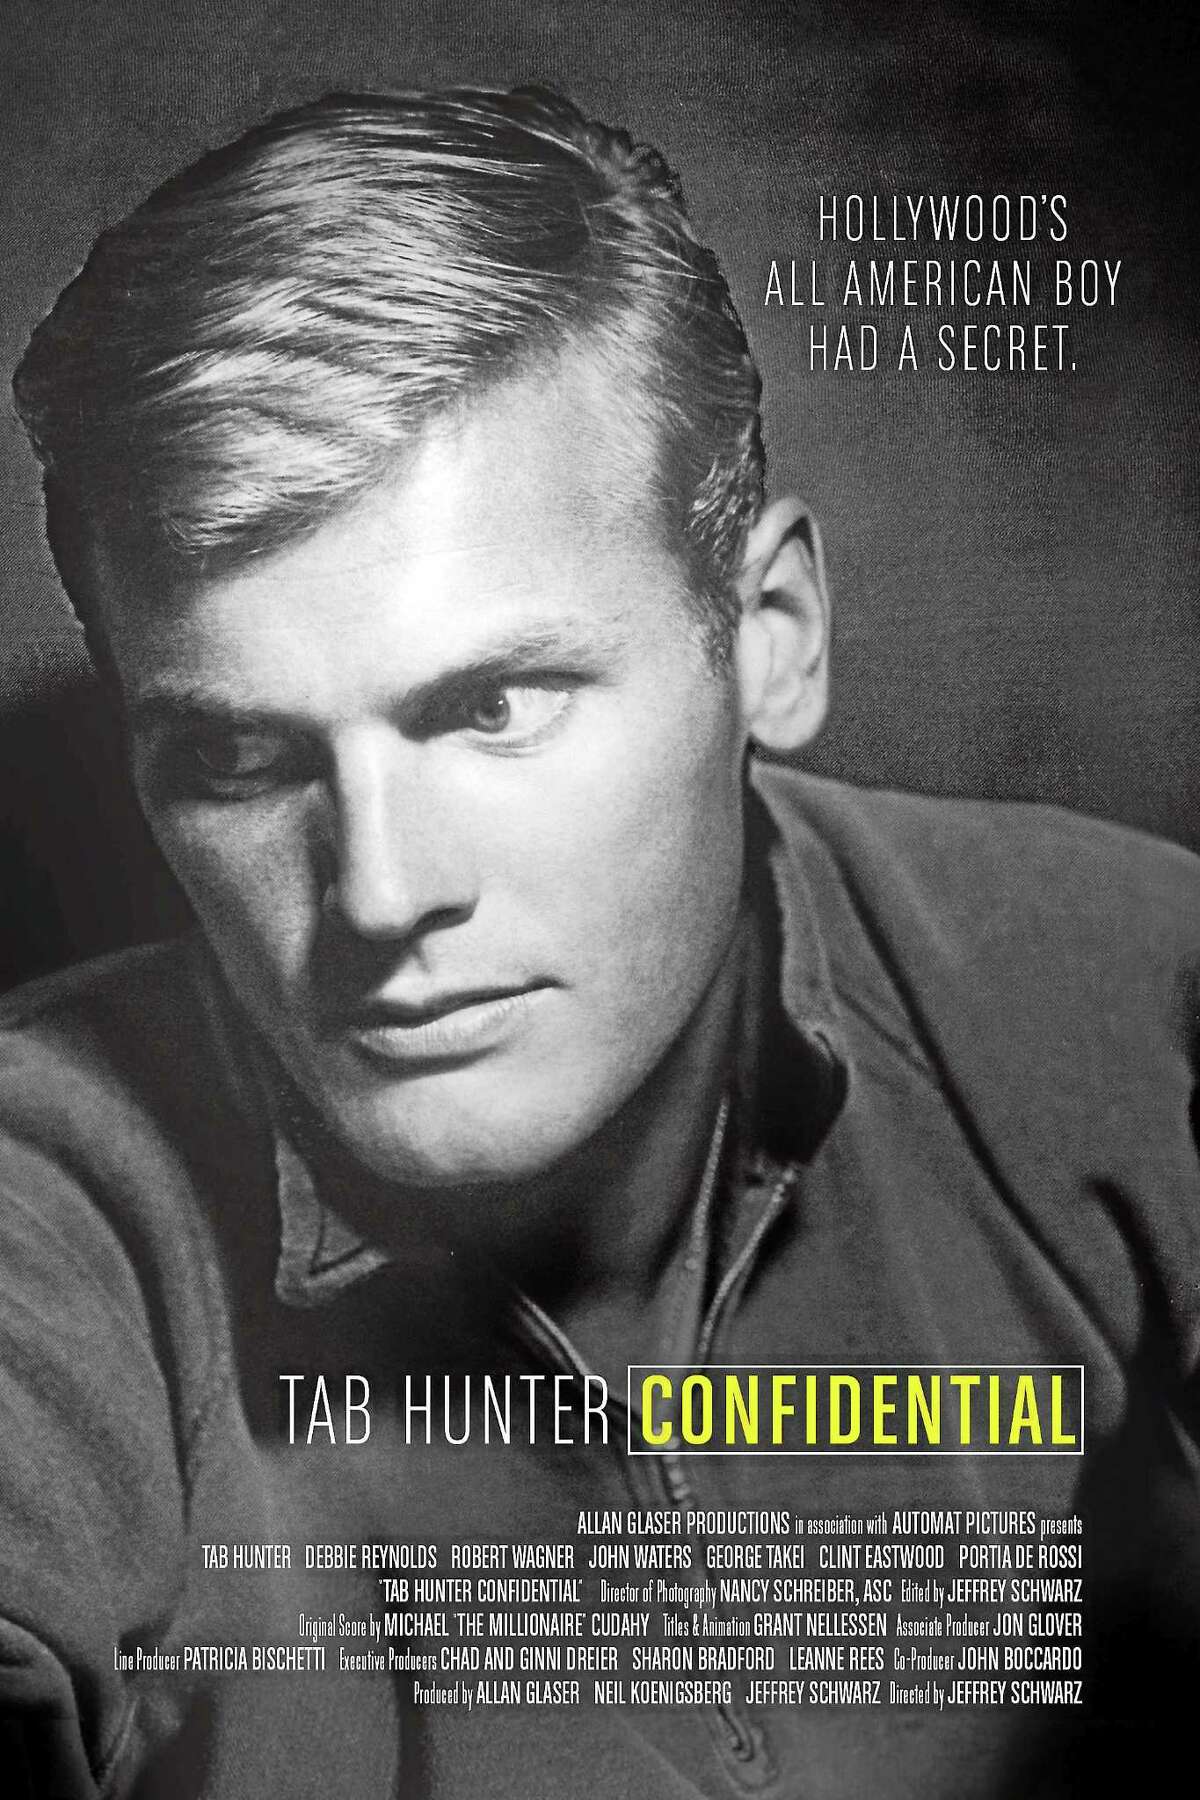 Contributed photo A discussion with the actor on "Tab Hunter Confidential" will be held at the Warner Theatre in October.